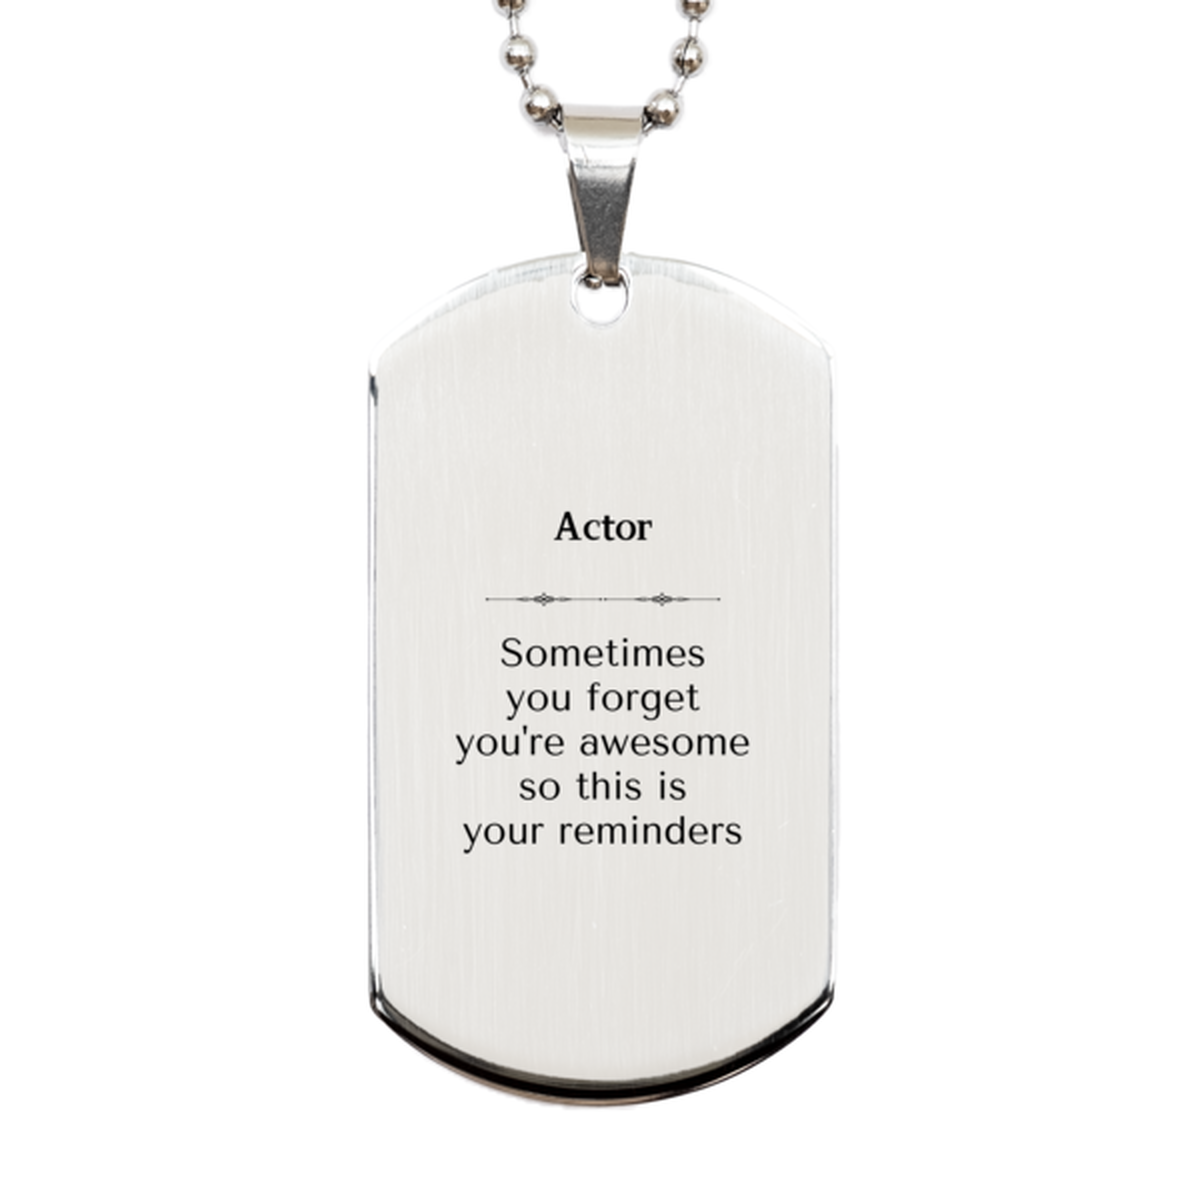 Sentimental Actor Silver Dog Tag, Actor Sometimes you forget you're awesome so this is your reminders, Graduation Christmas Birthday Gifts for Actor, Men, Women, Coworkers